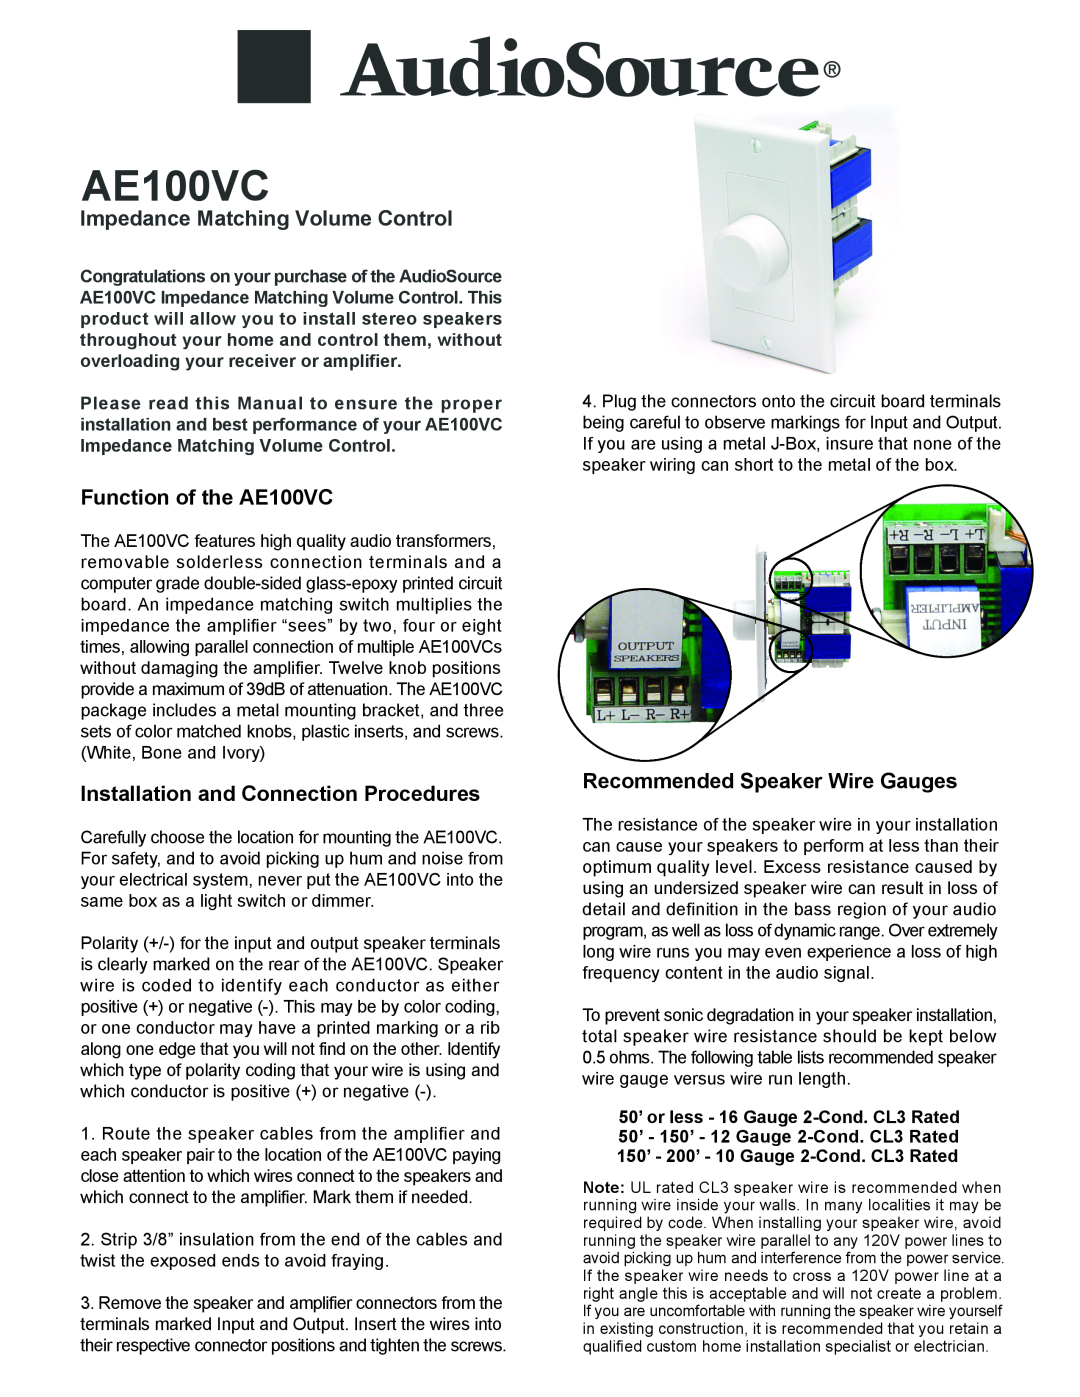 AudioSource manual Impedance Matching Volume Control, Function of the AE100VC, Installation and Connection Procedures 